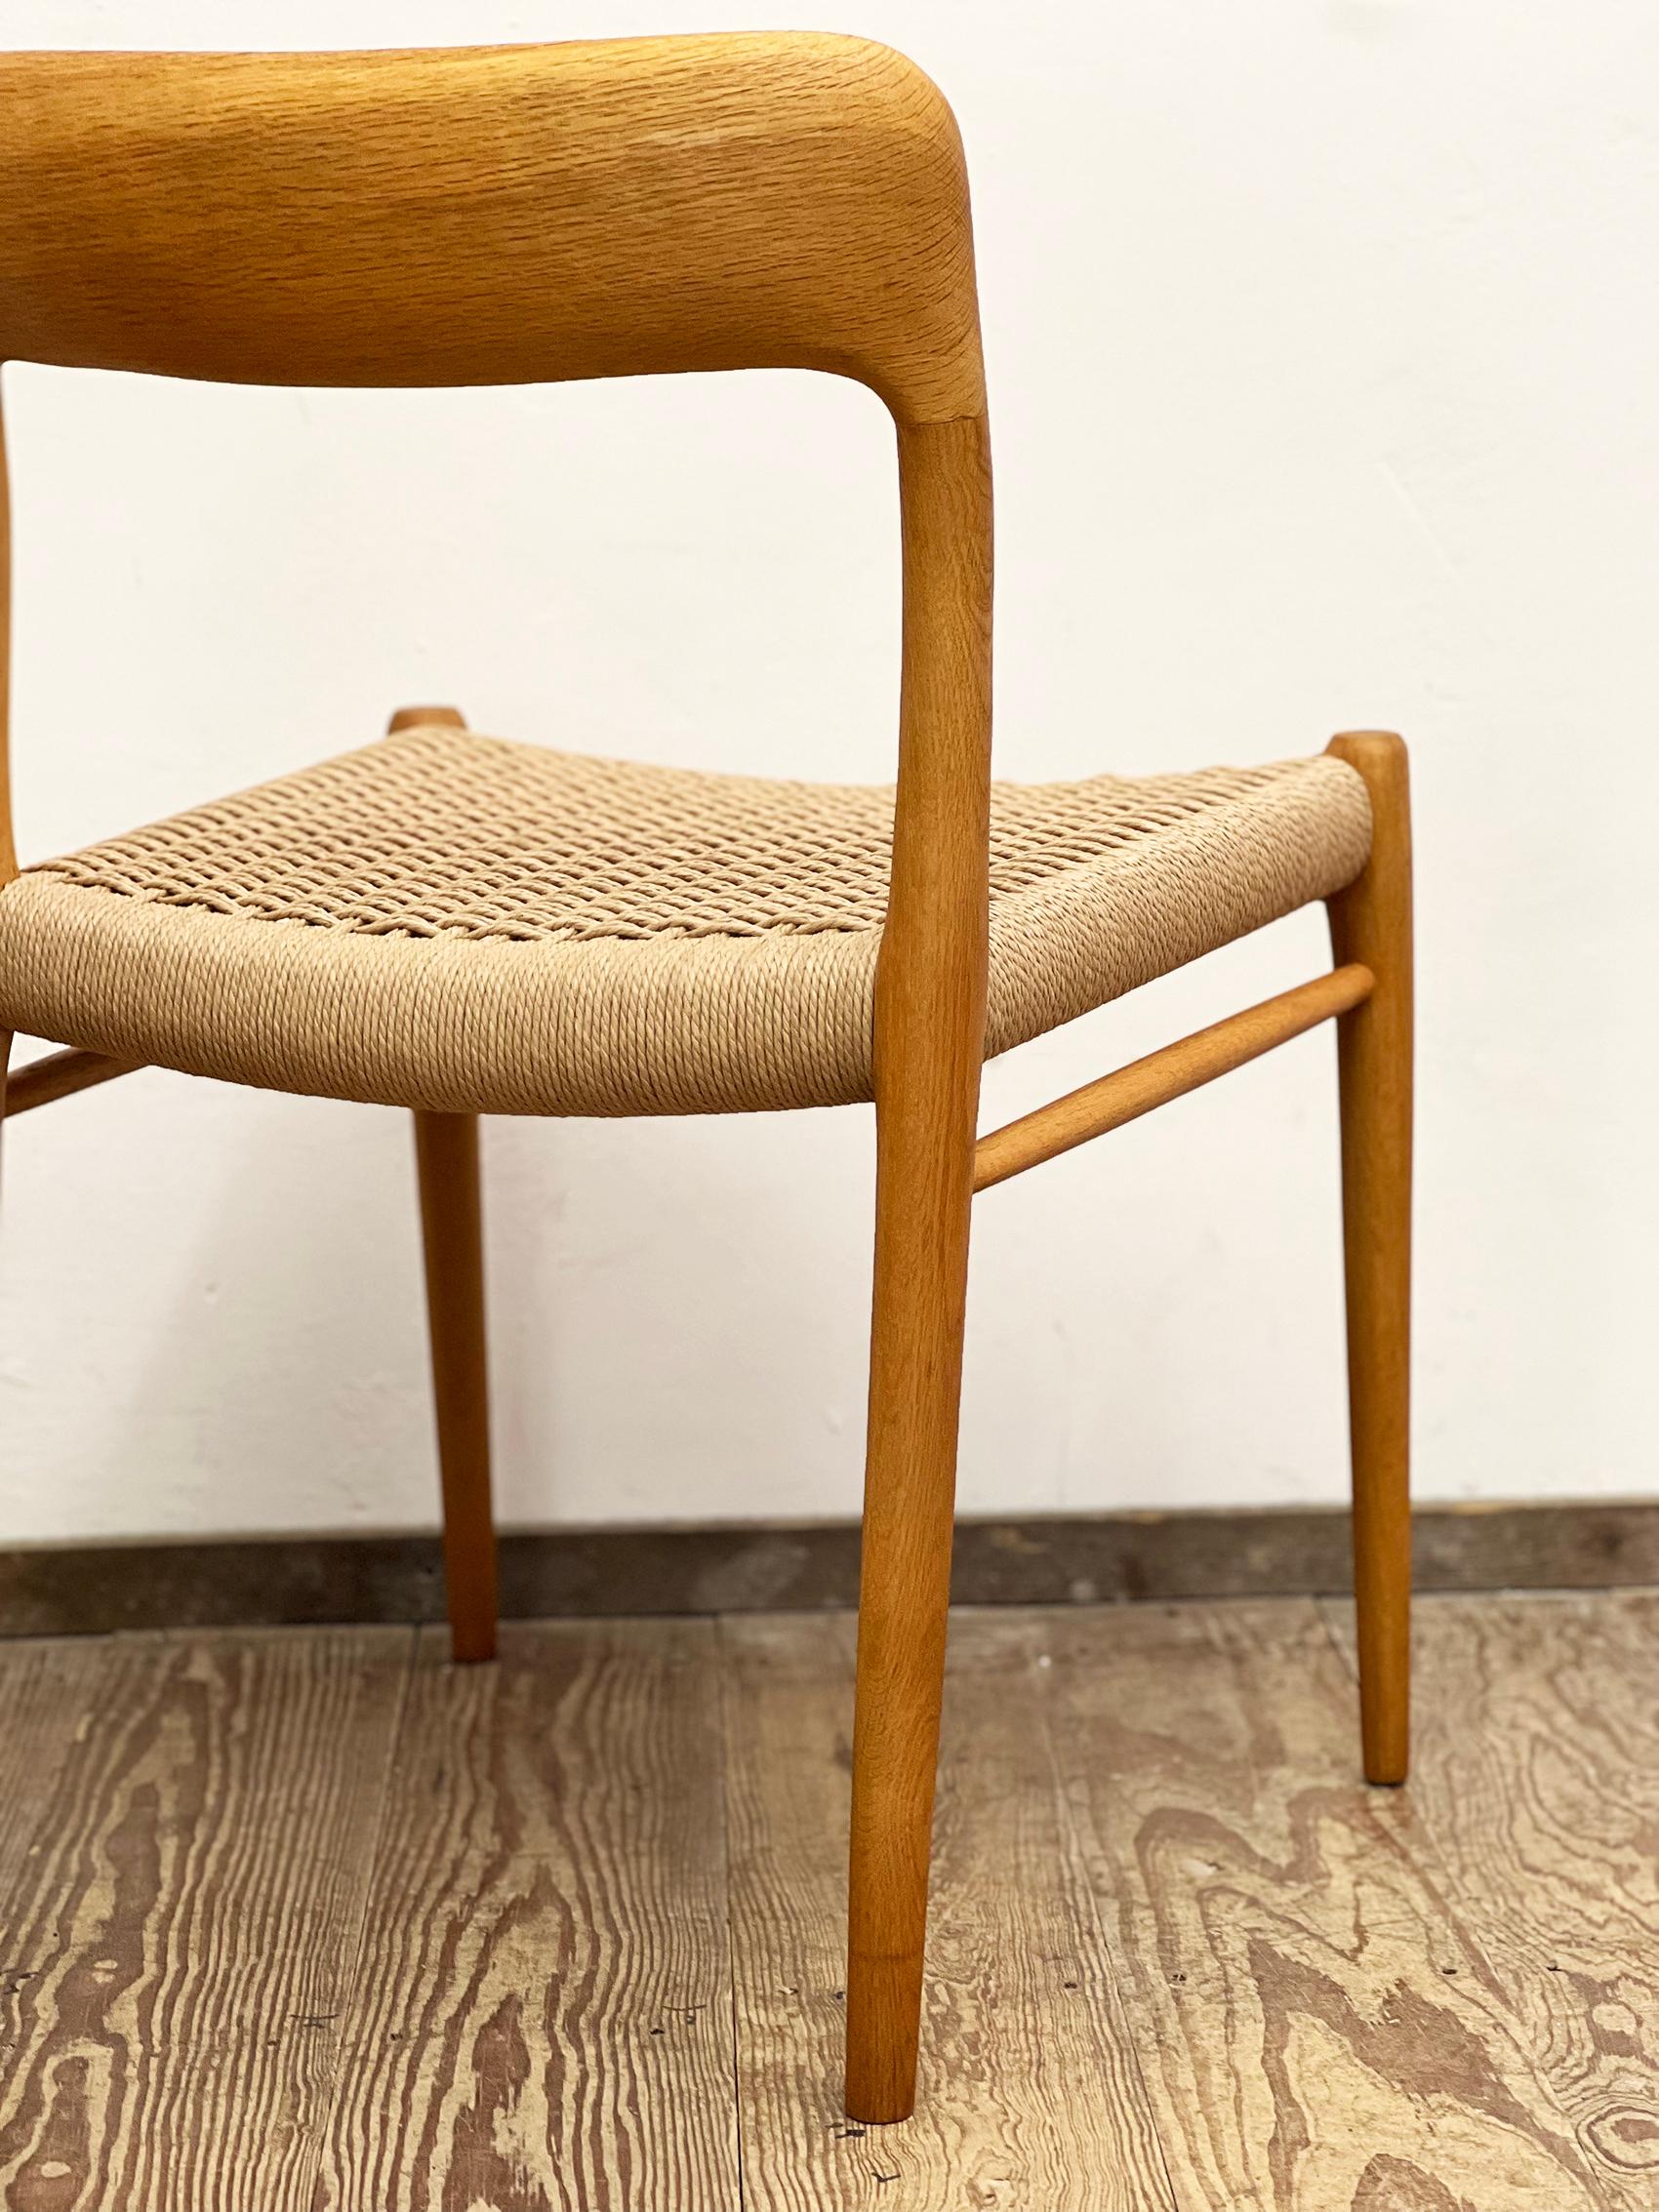 Pair of Mid-Century Oak Dining Chairs #75, Niels O. Møller for J. L. Moller For Sale 8